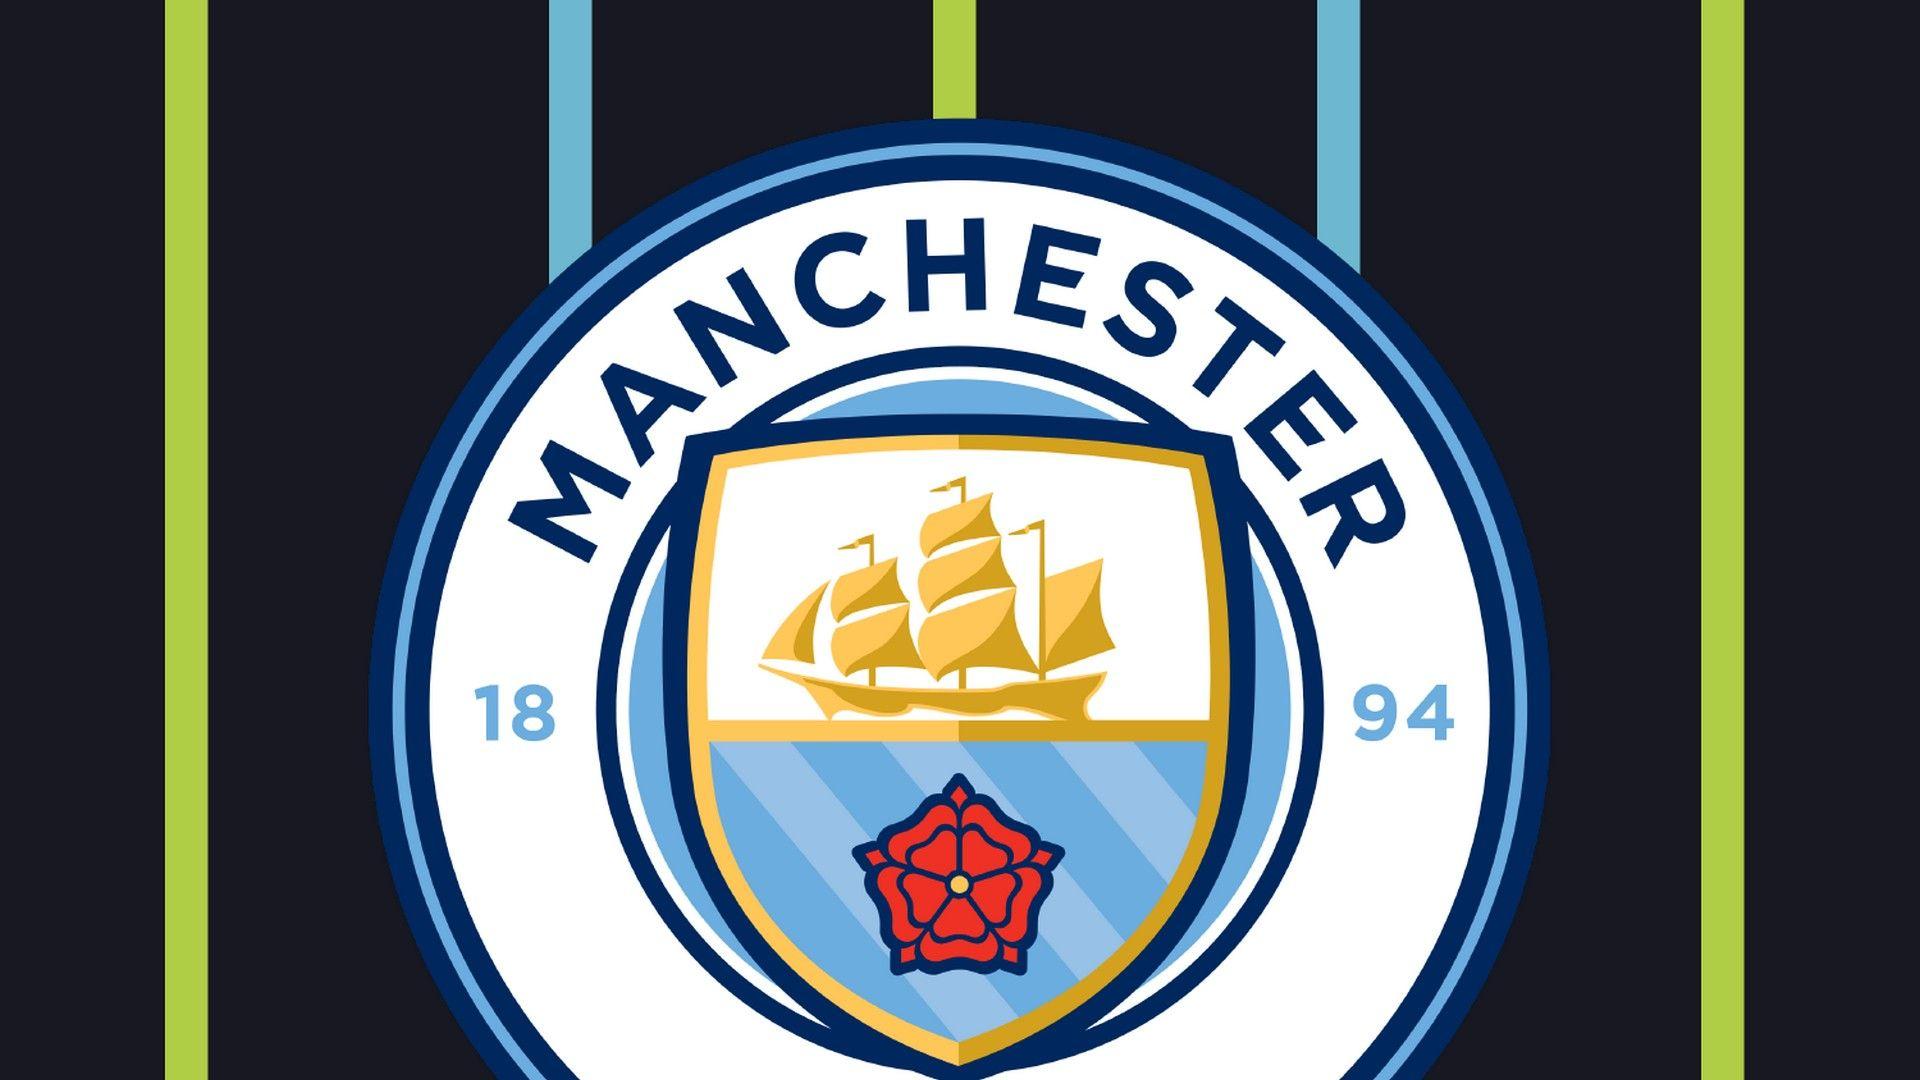 Manchester City Background HD. City background